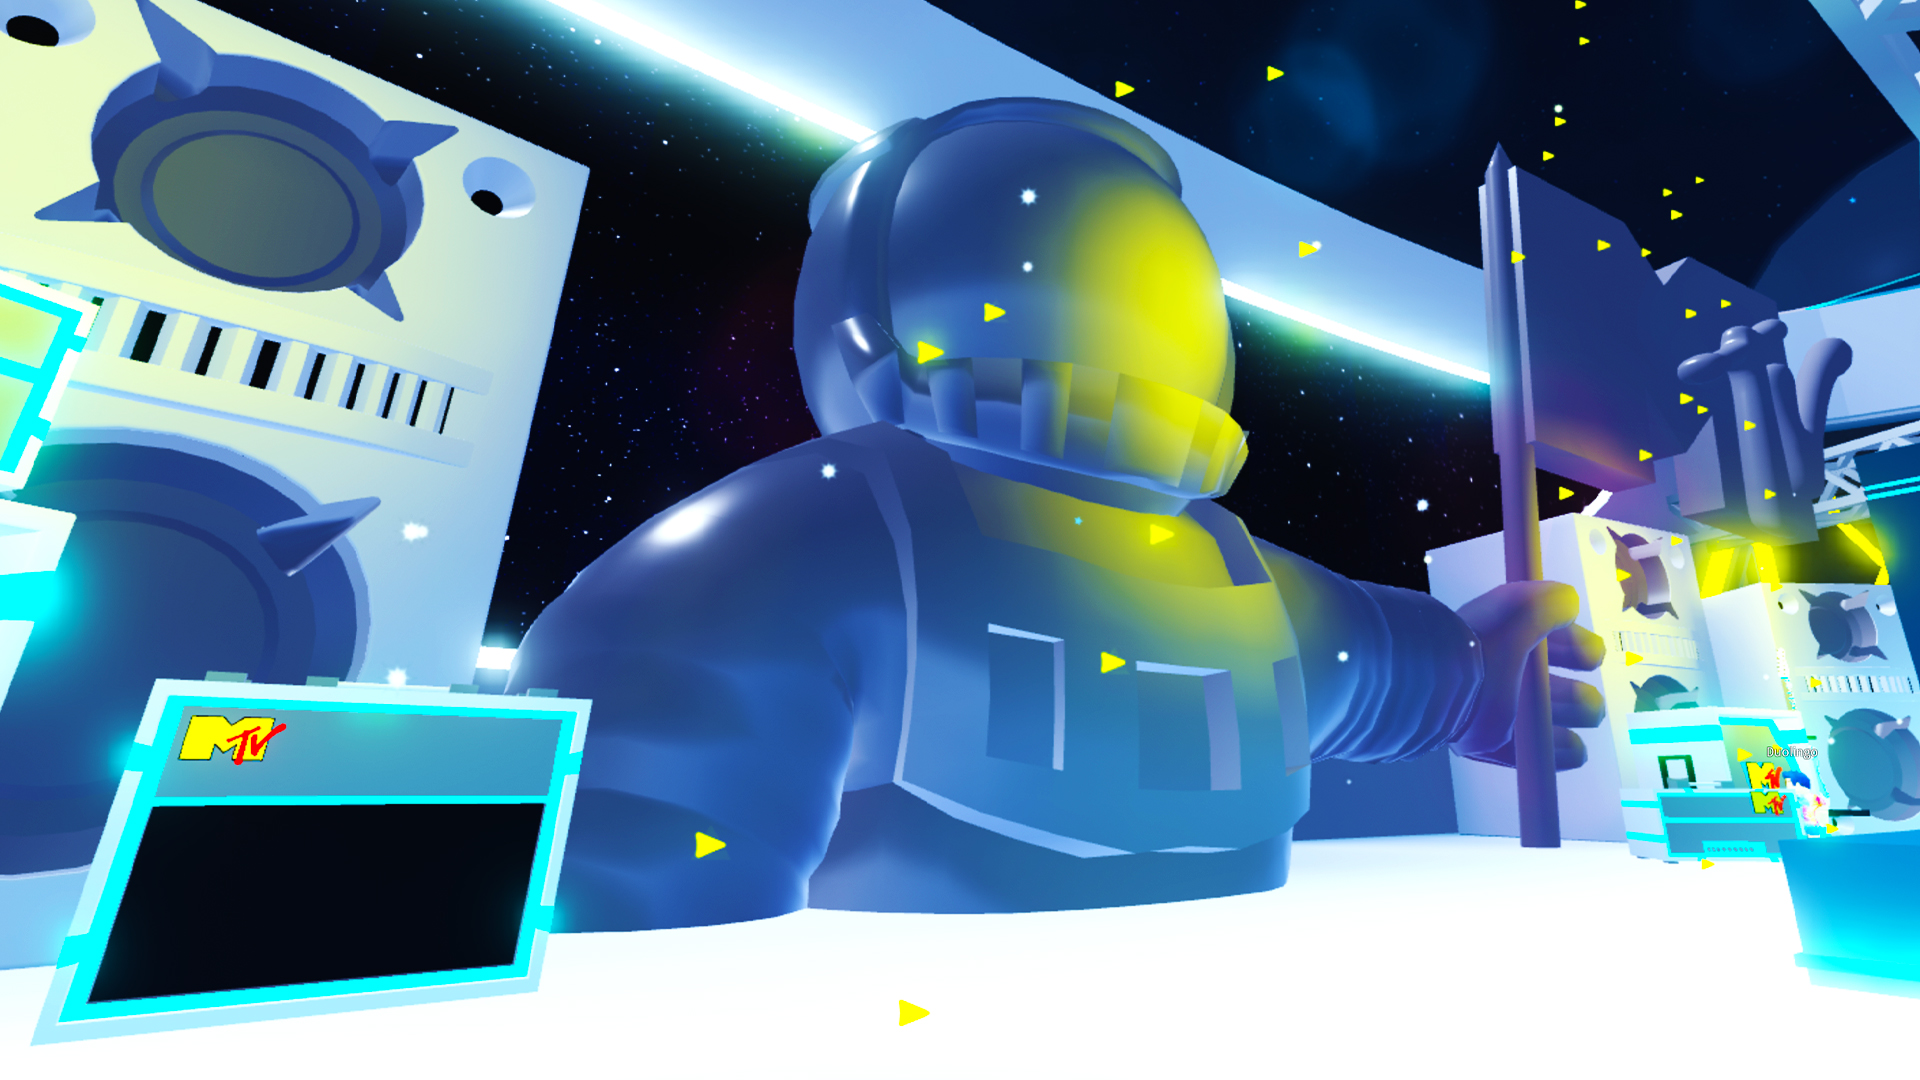 Roblox MTV VMA experience kicks off in the metaverse today